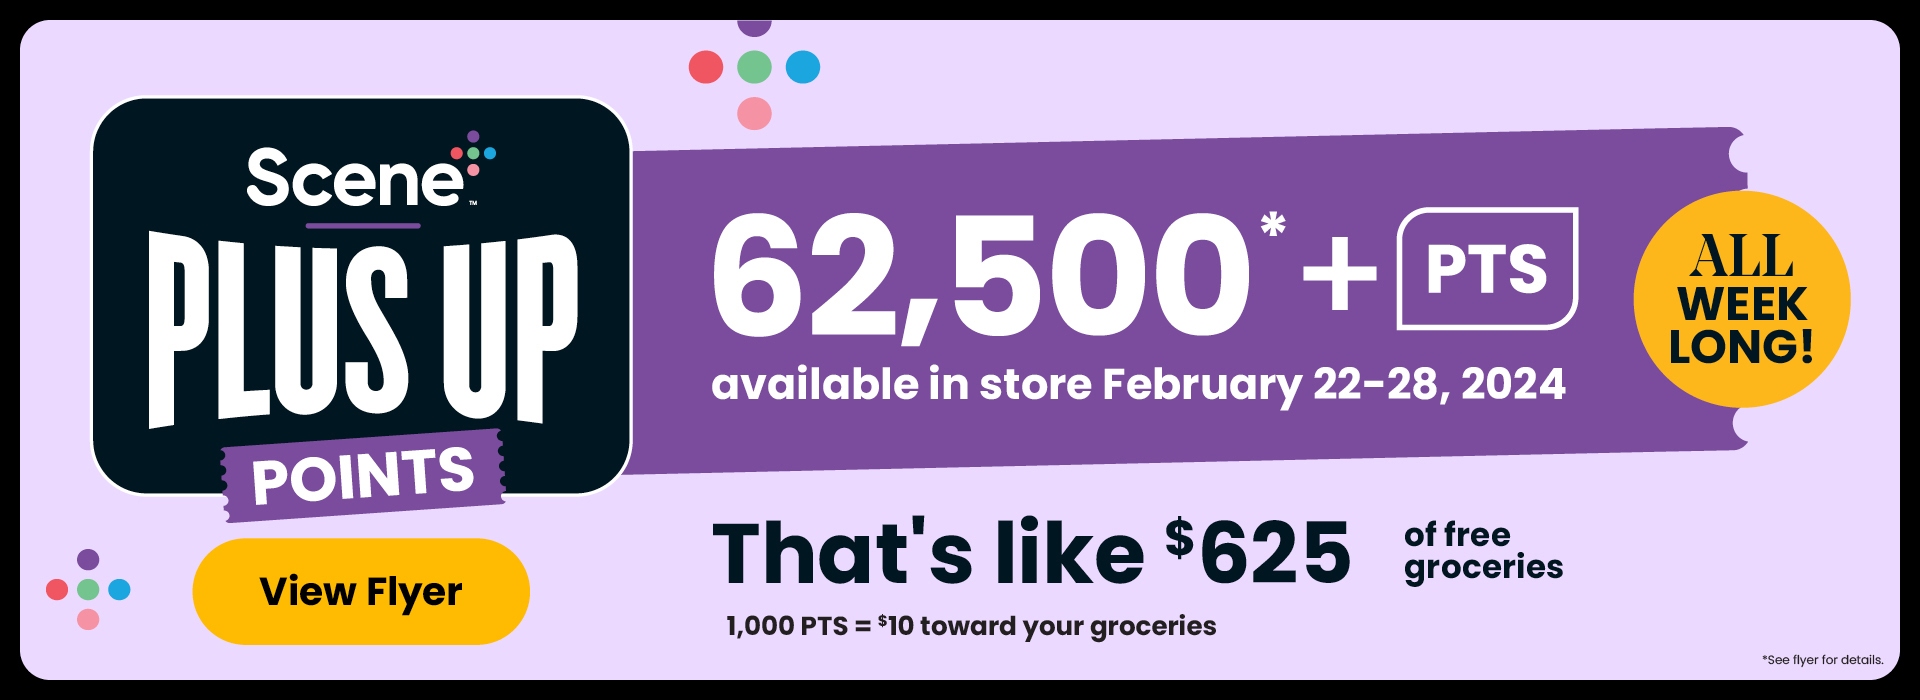 All Week Long! Scene+ Plus Up Points. Over 62,500 PTS available in-store. That's like $625 toward your groceries. 1,000 PTS = $10 toward your groceres. See flyer or in-store for participating products.